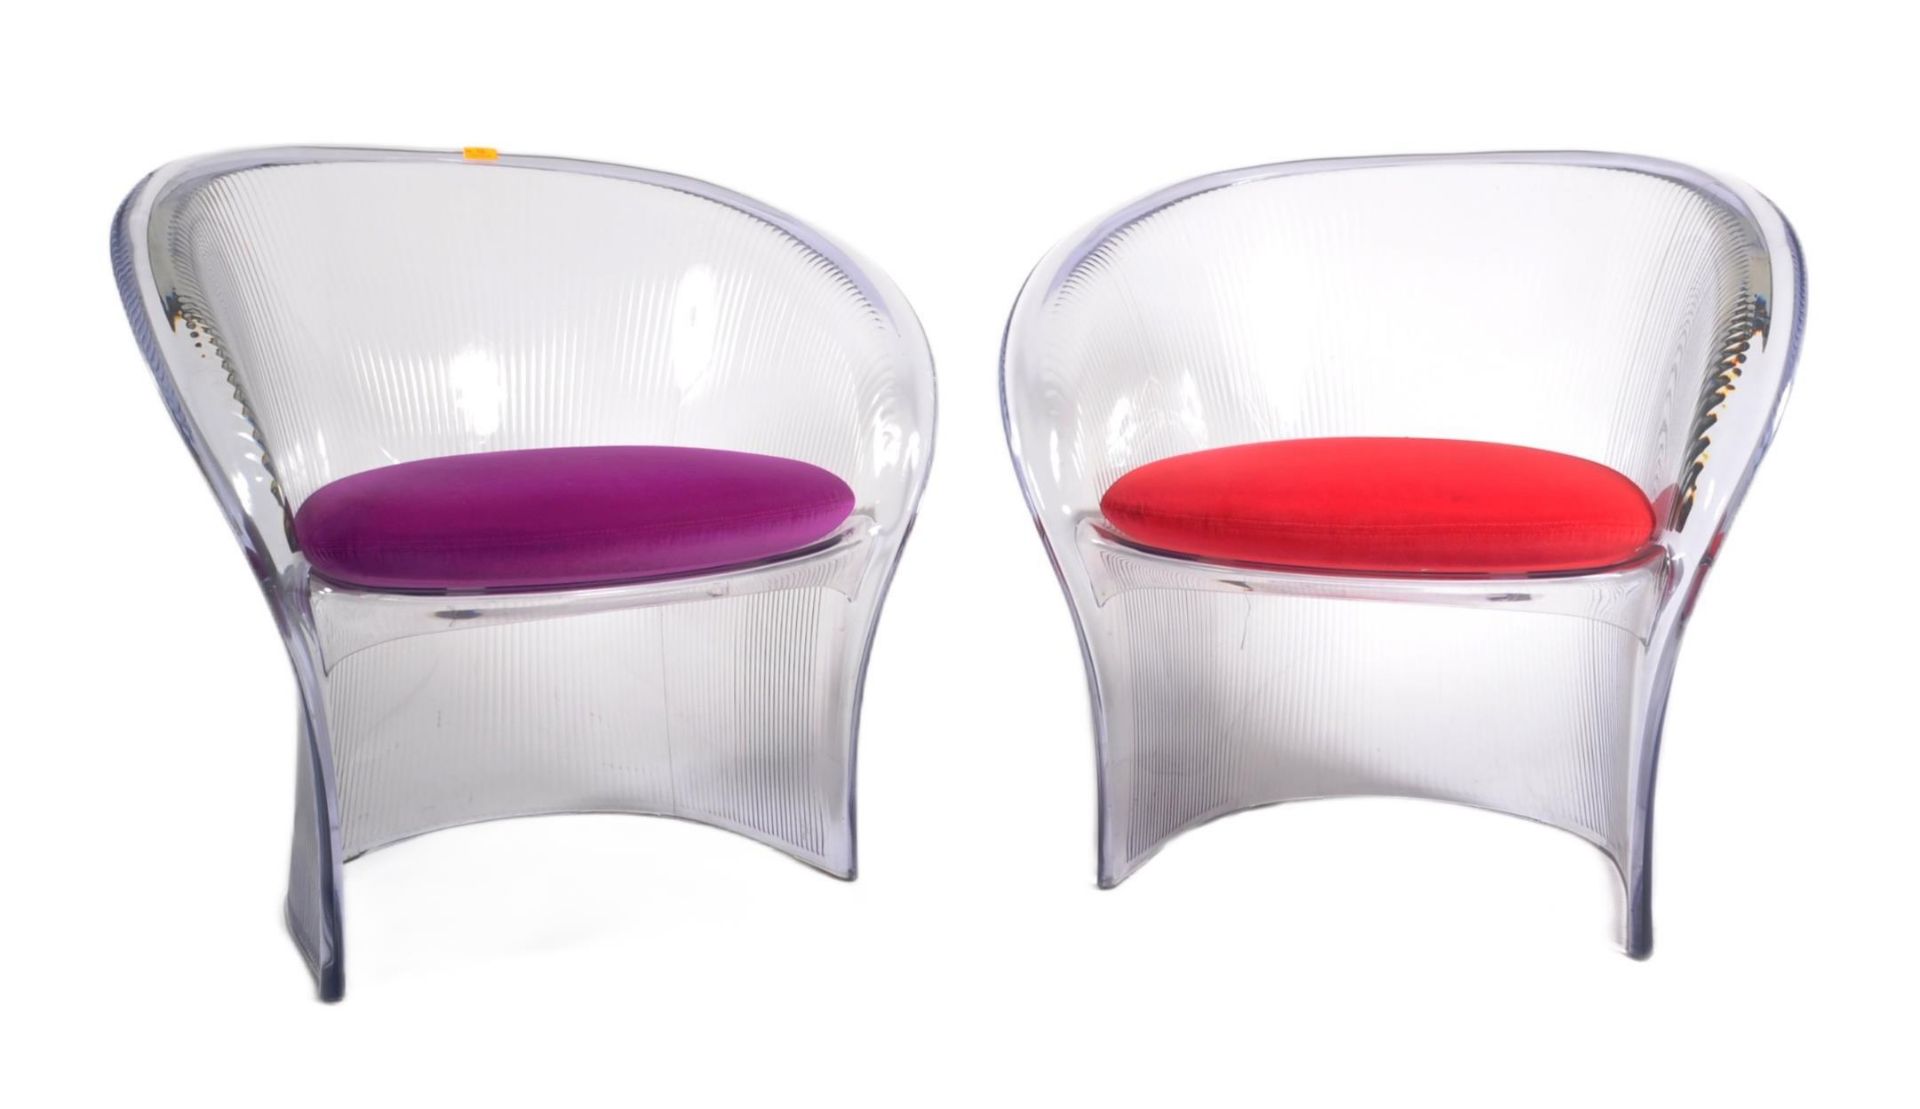 PIERRE PAULIN FOR MAGIS - FLOWER CHAIR - PAIR OF CHAIRS